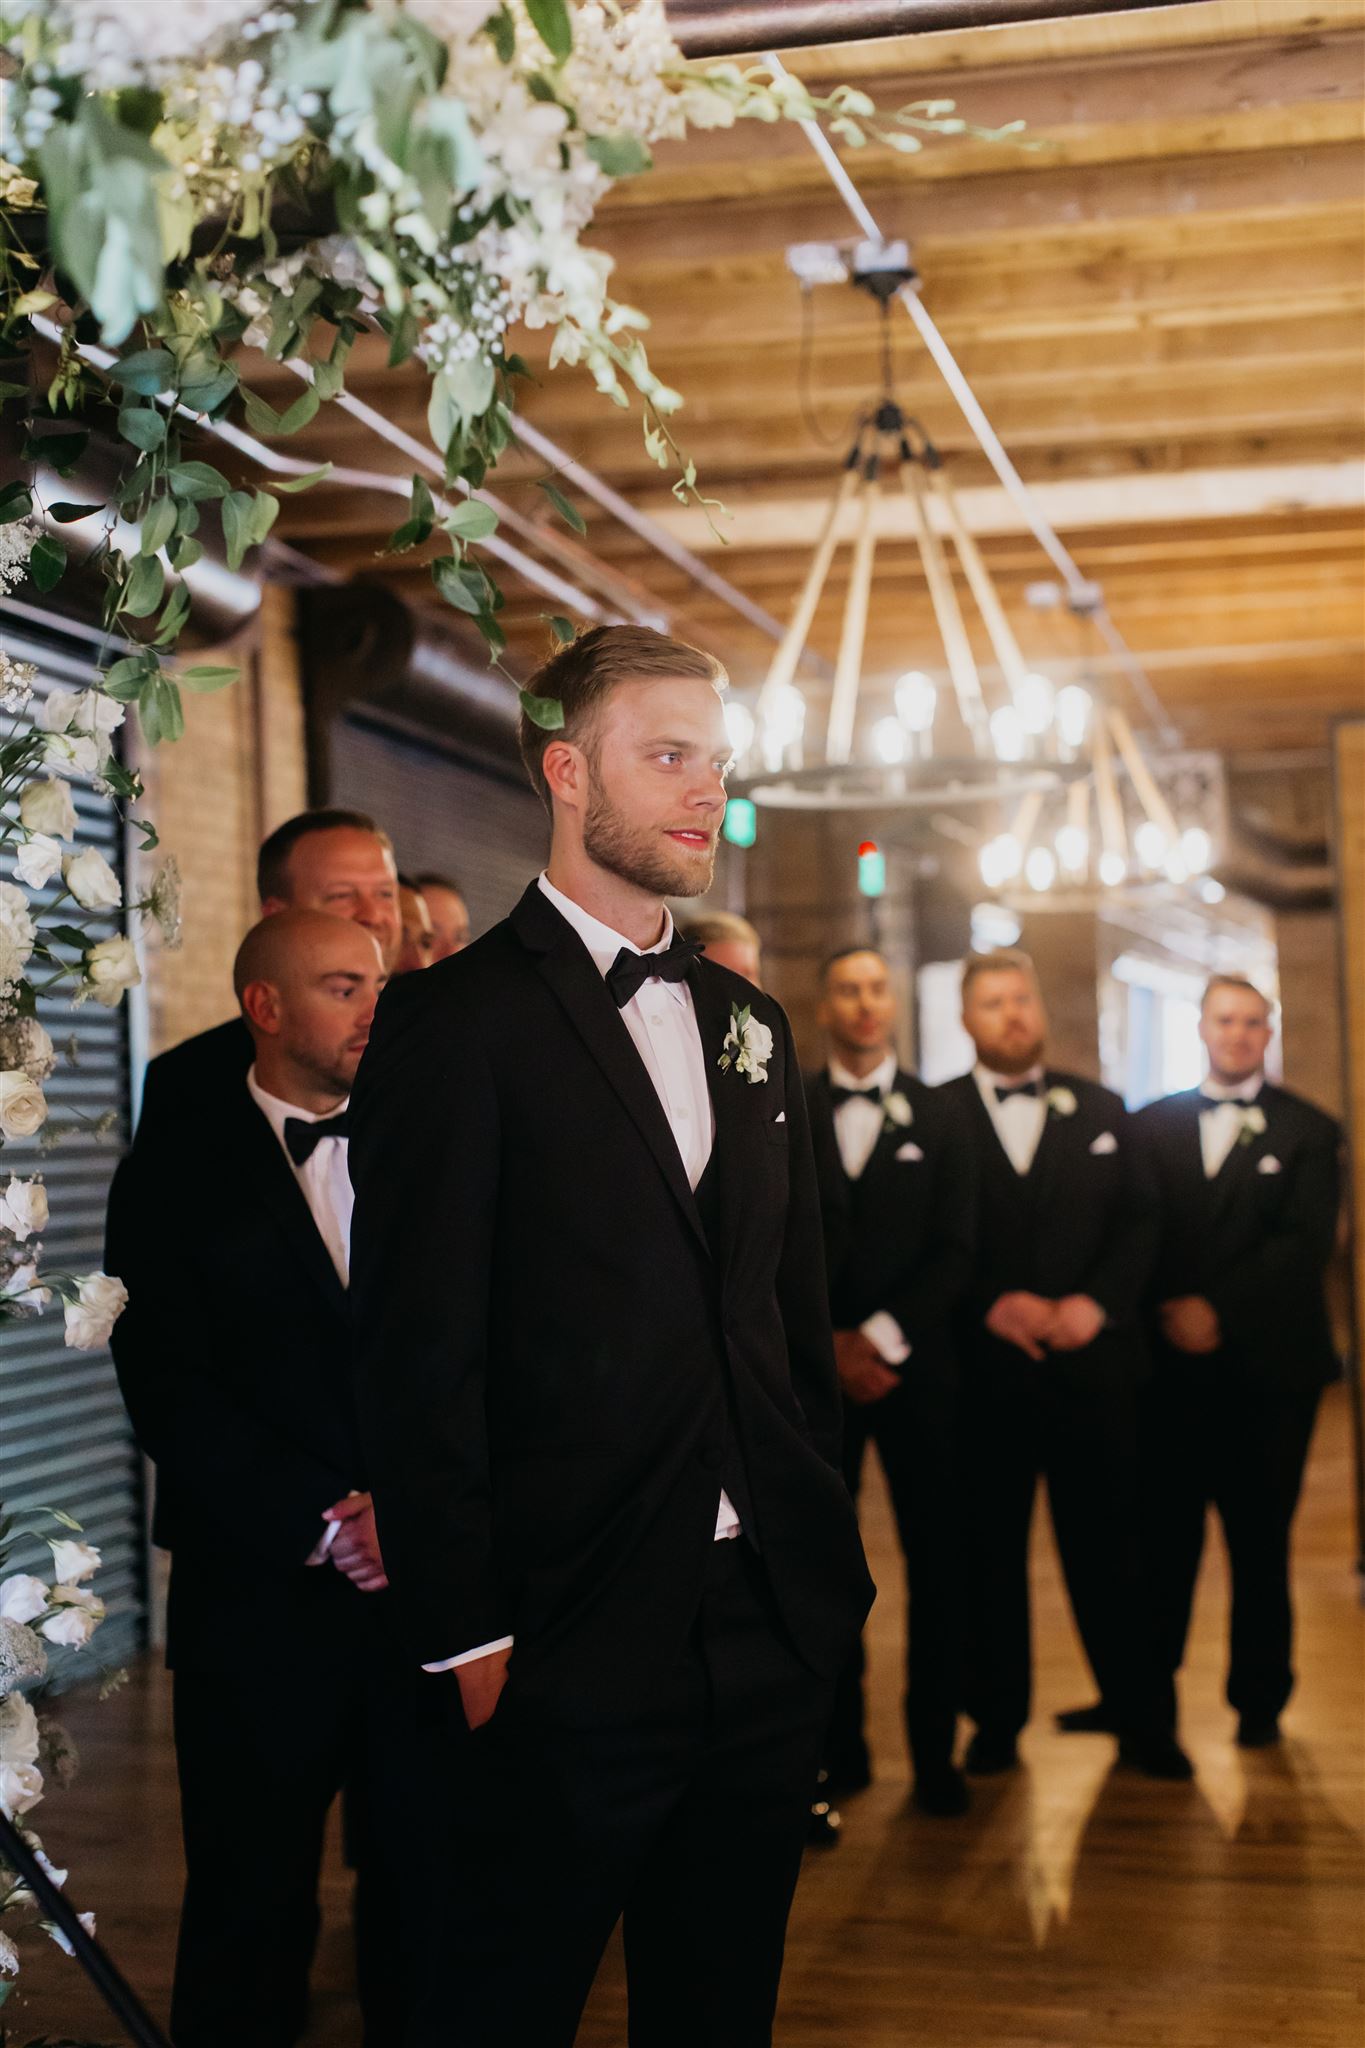 A groom watching her future spouse as she makes her way down the wedding aisle